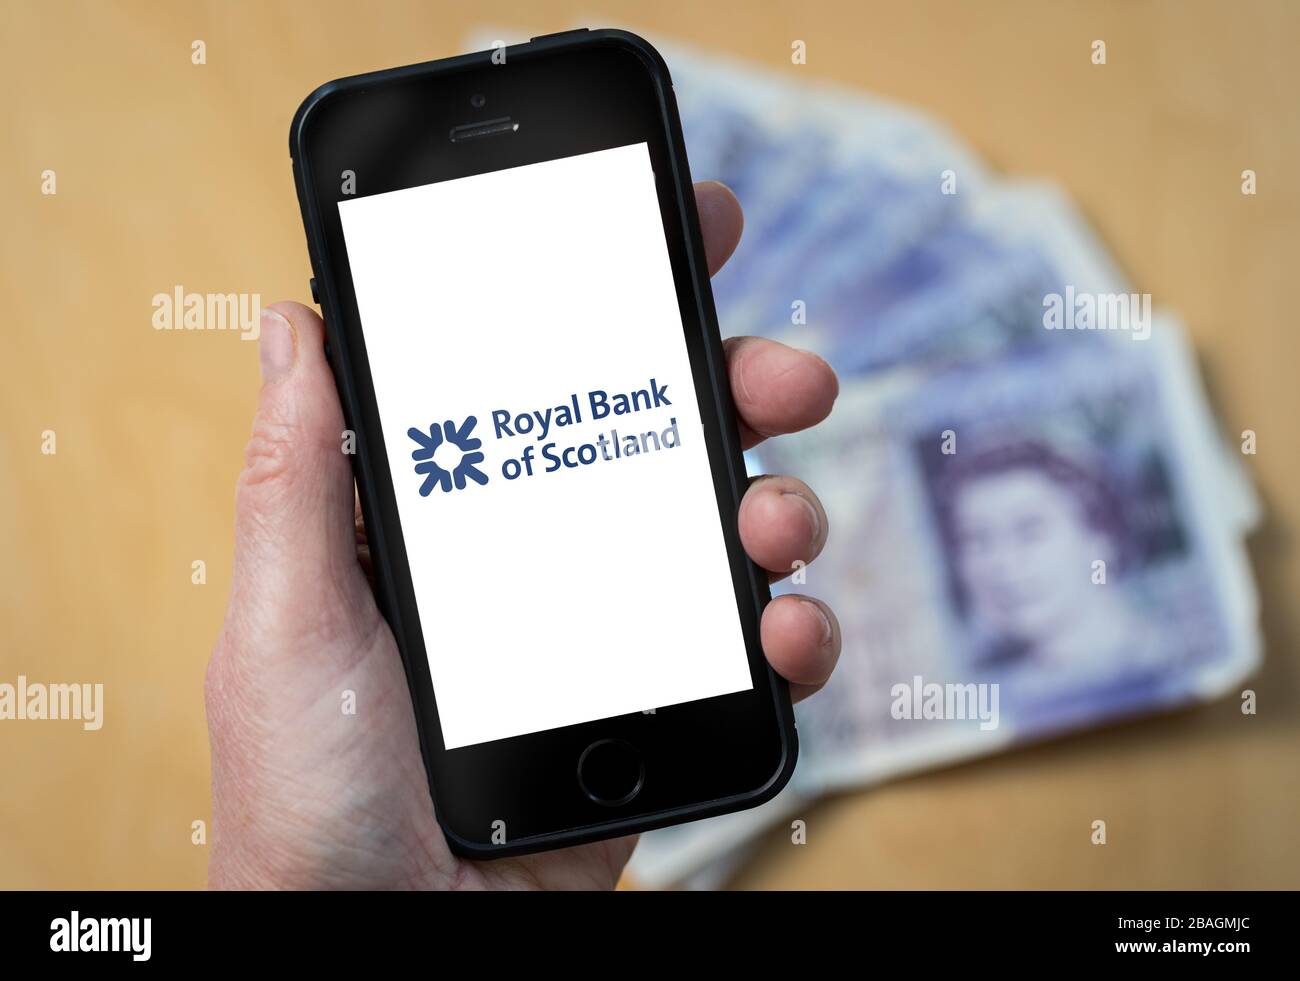 A woman looking at the Royal Bank of Scotland logo on a mobile phone. (editorial Use Only) Stock Photo